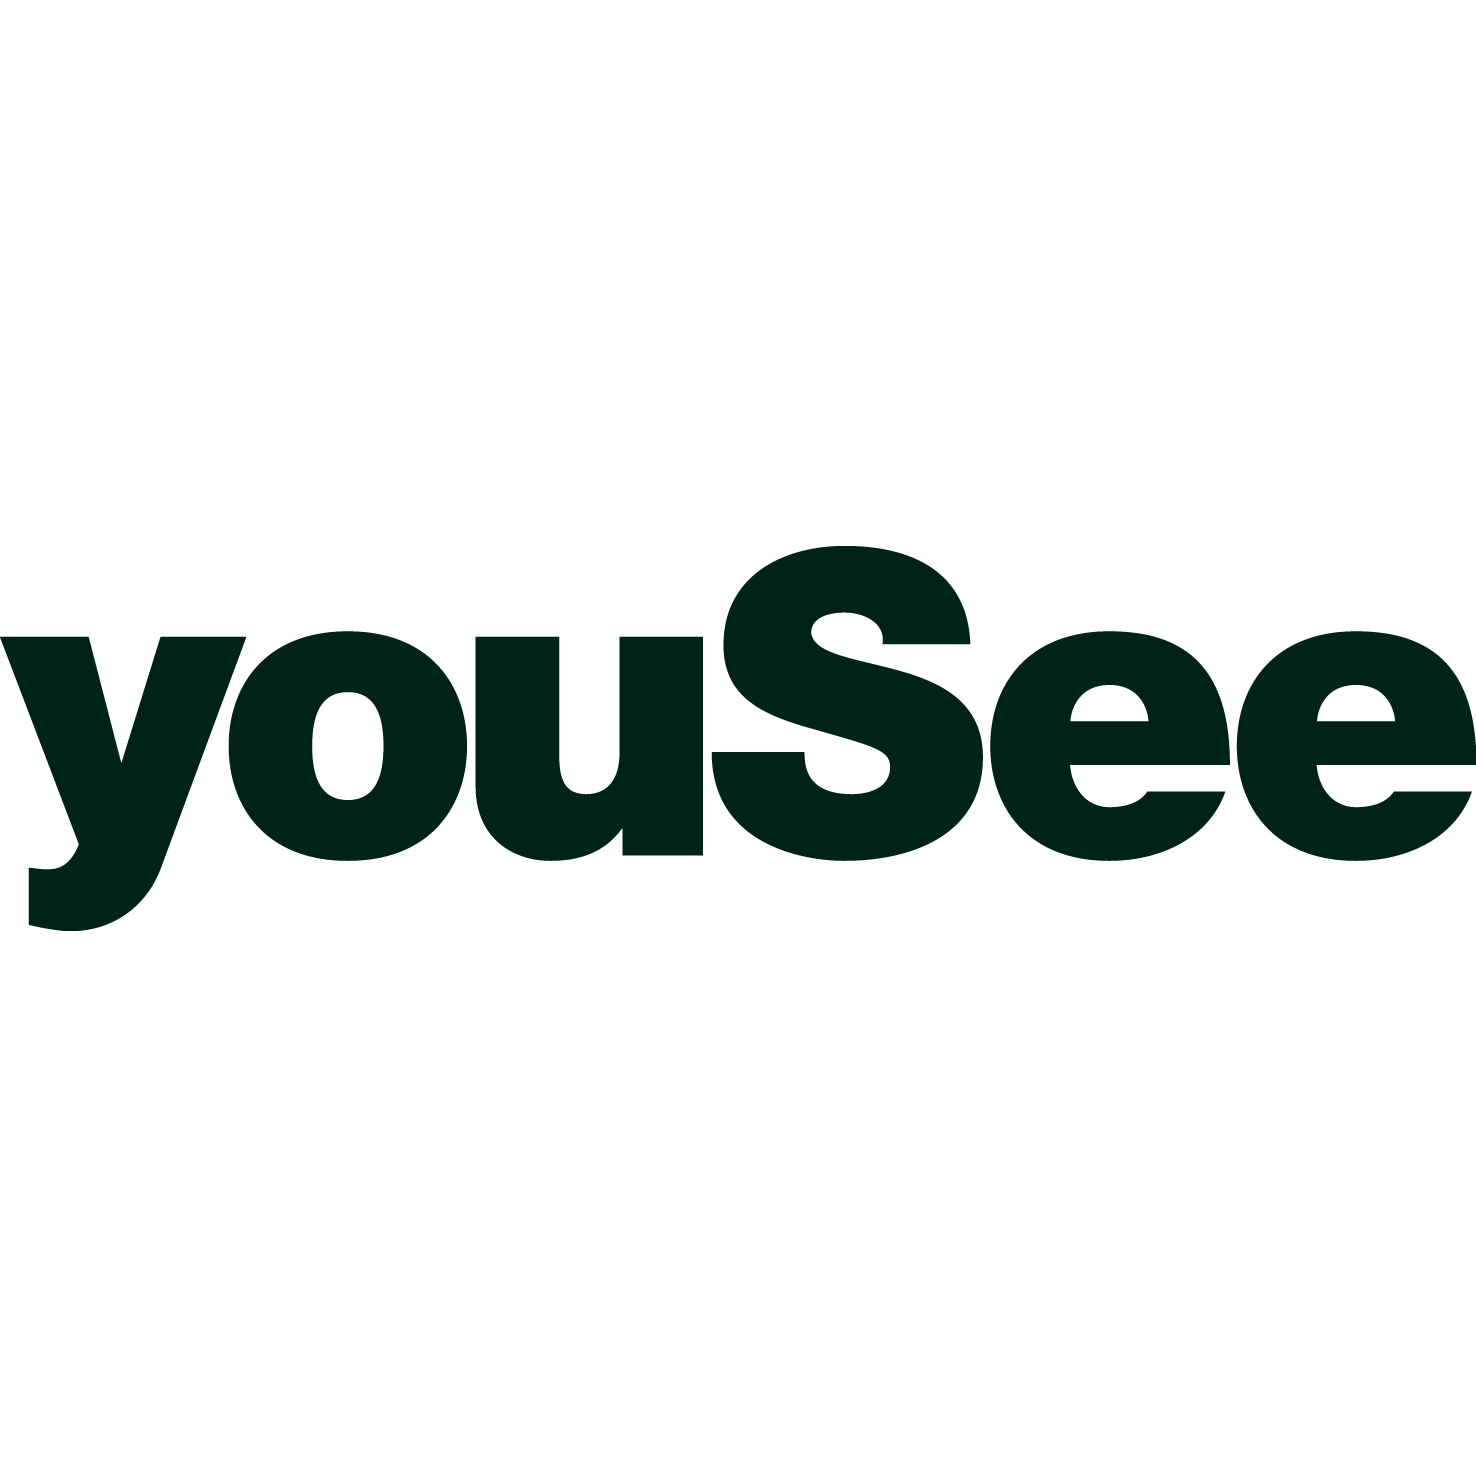 Yousee Brand Logo